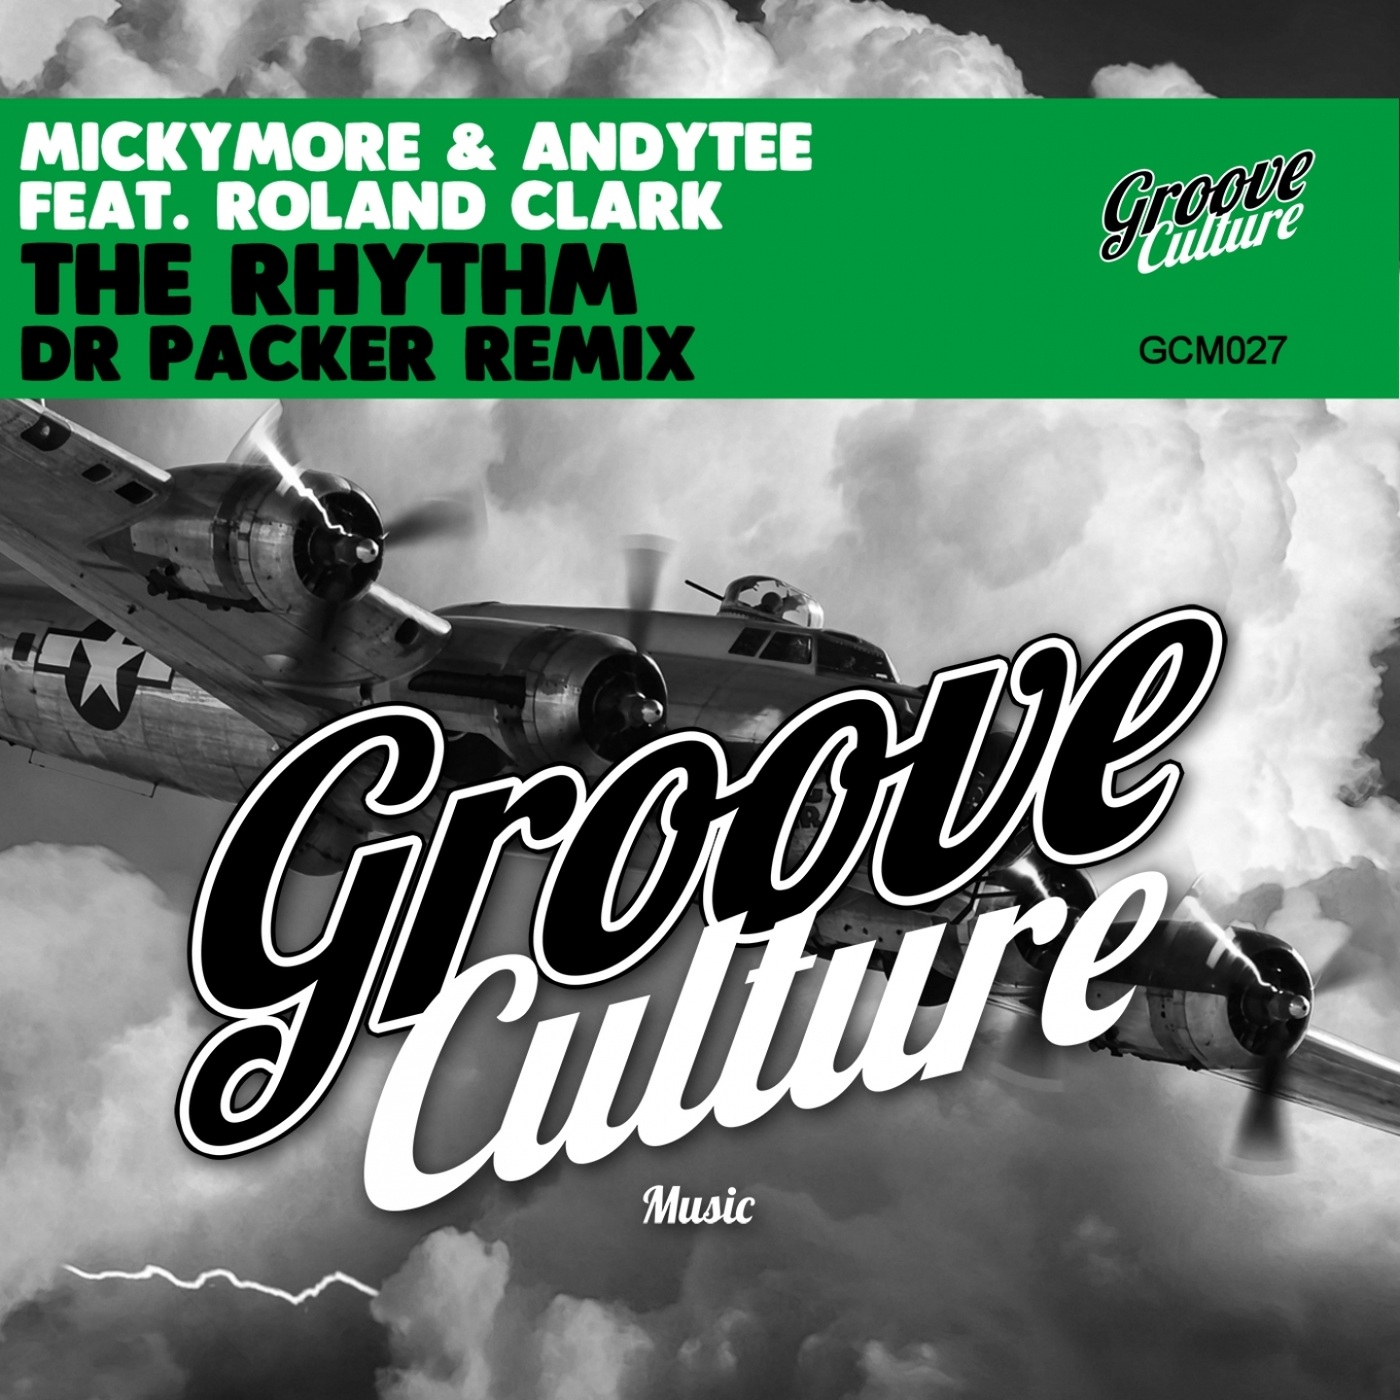 Micky More & Andy Tee ft Roland Clark - The Rhythm (Dr Packer Remix) / Groove Culture